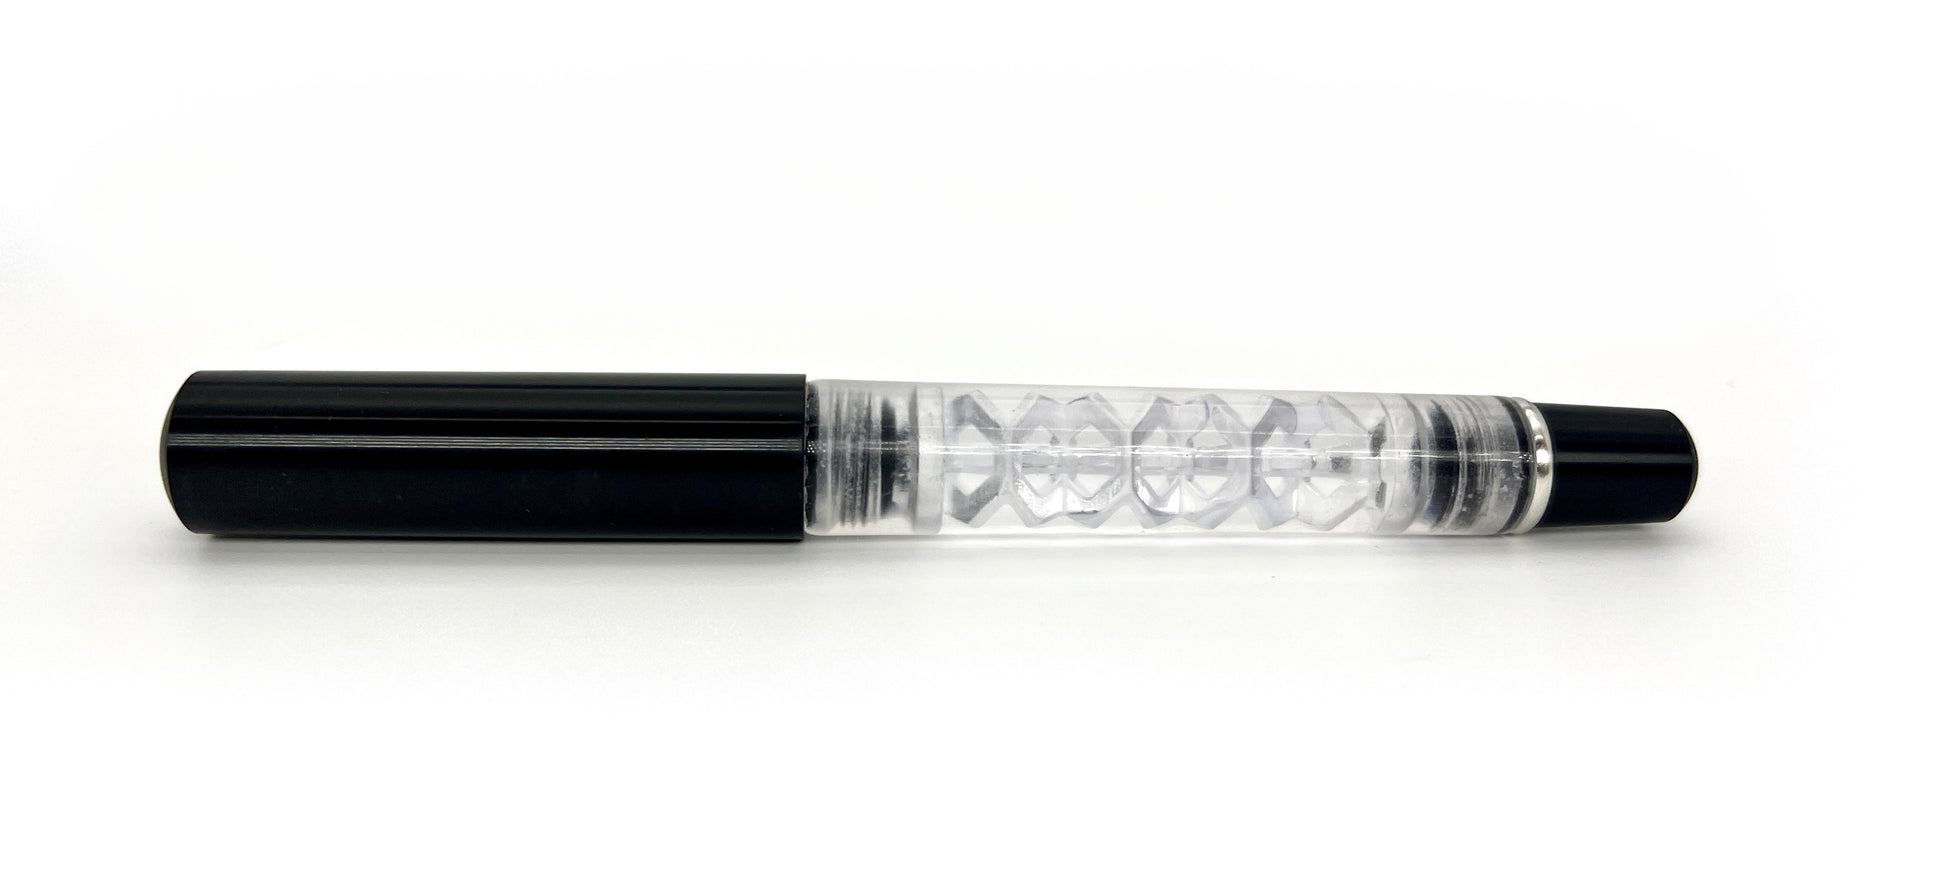 Hex Pens 3D Printed Fountain Pen Entwined Evolved Capped